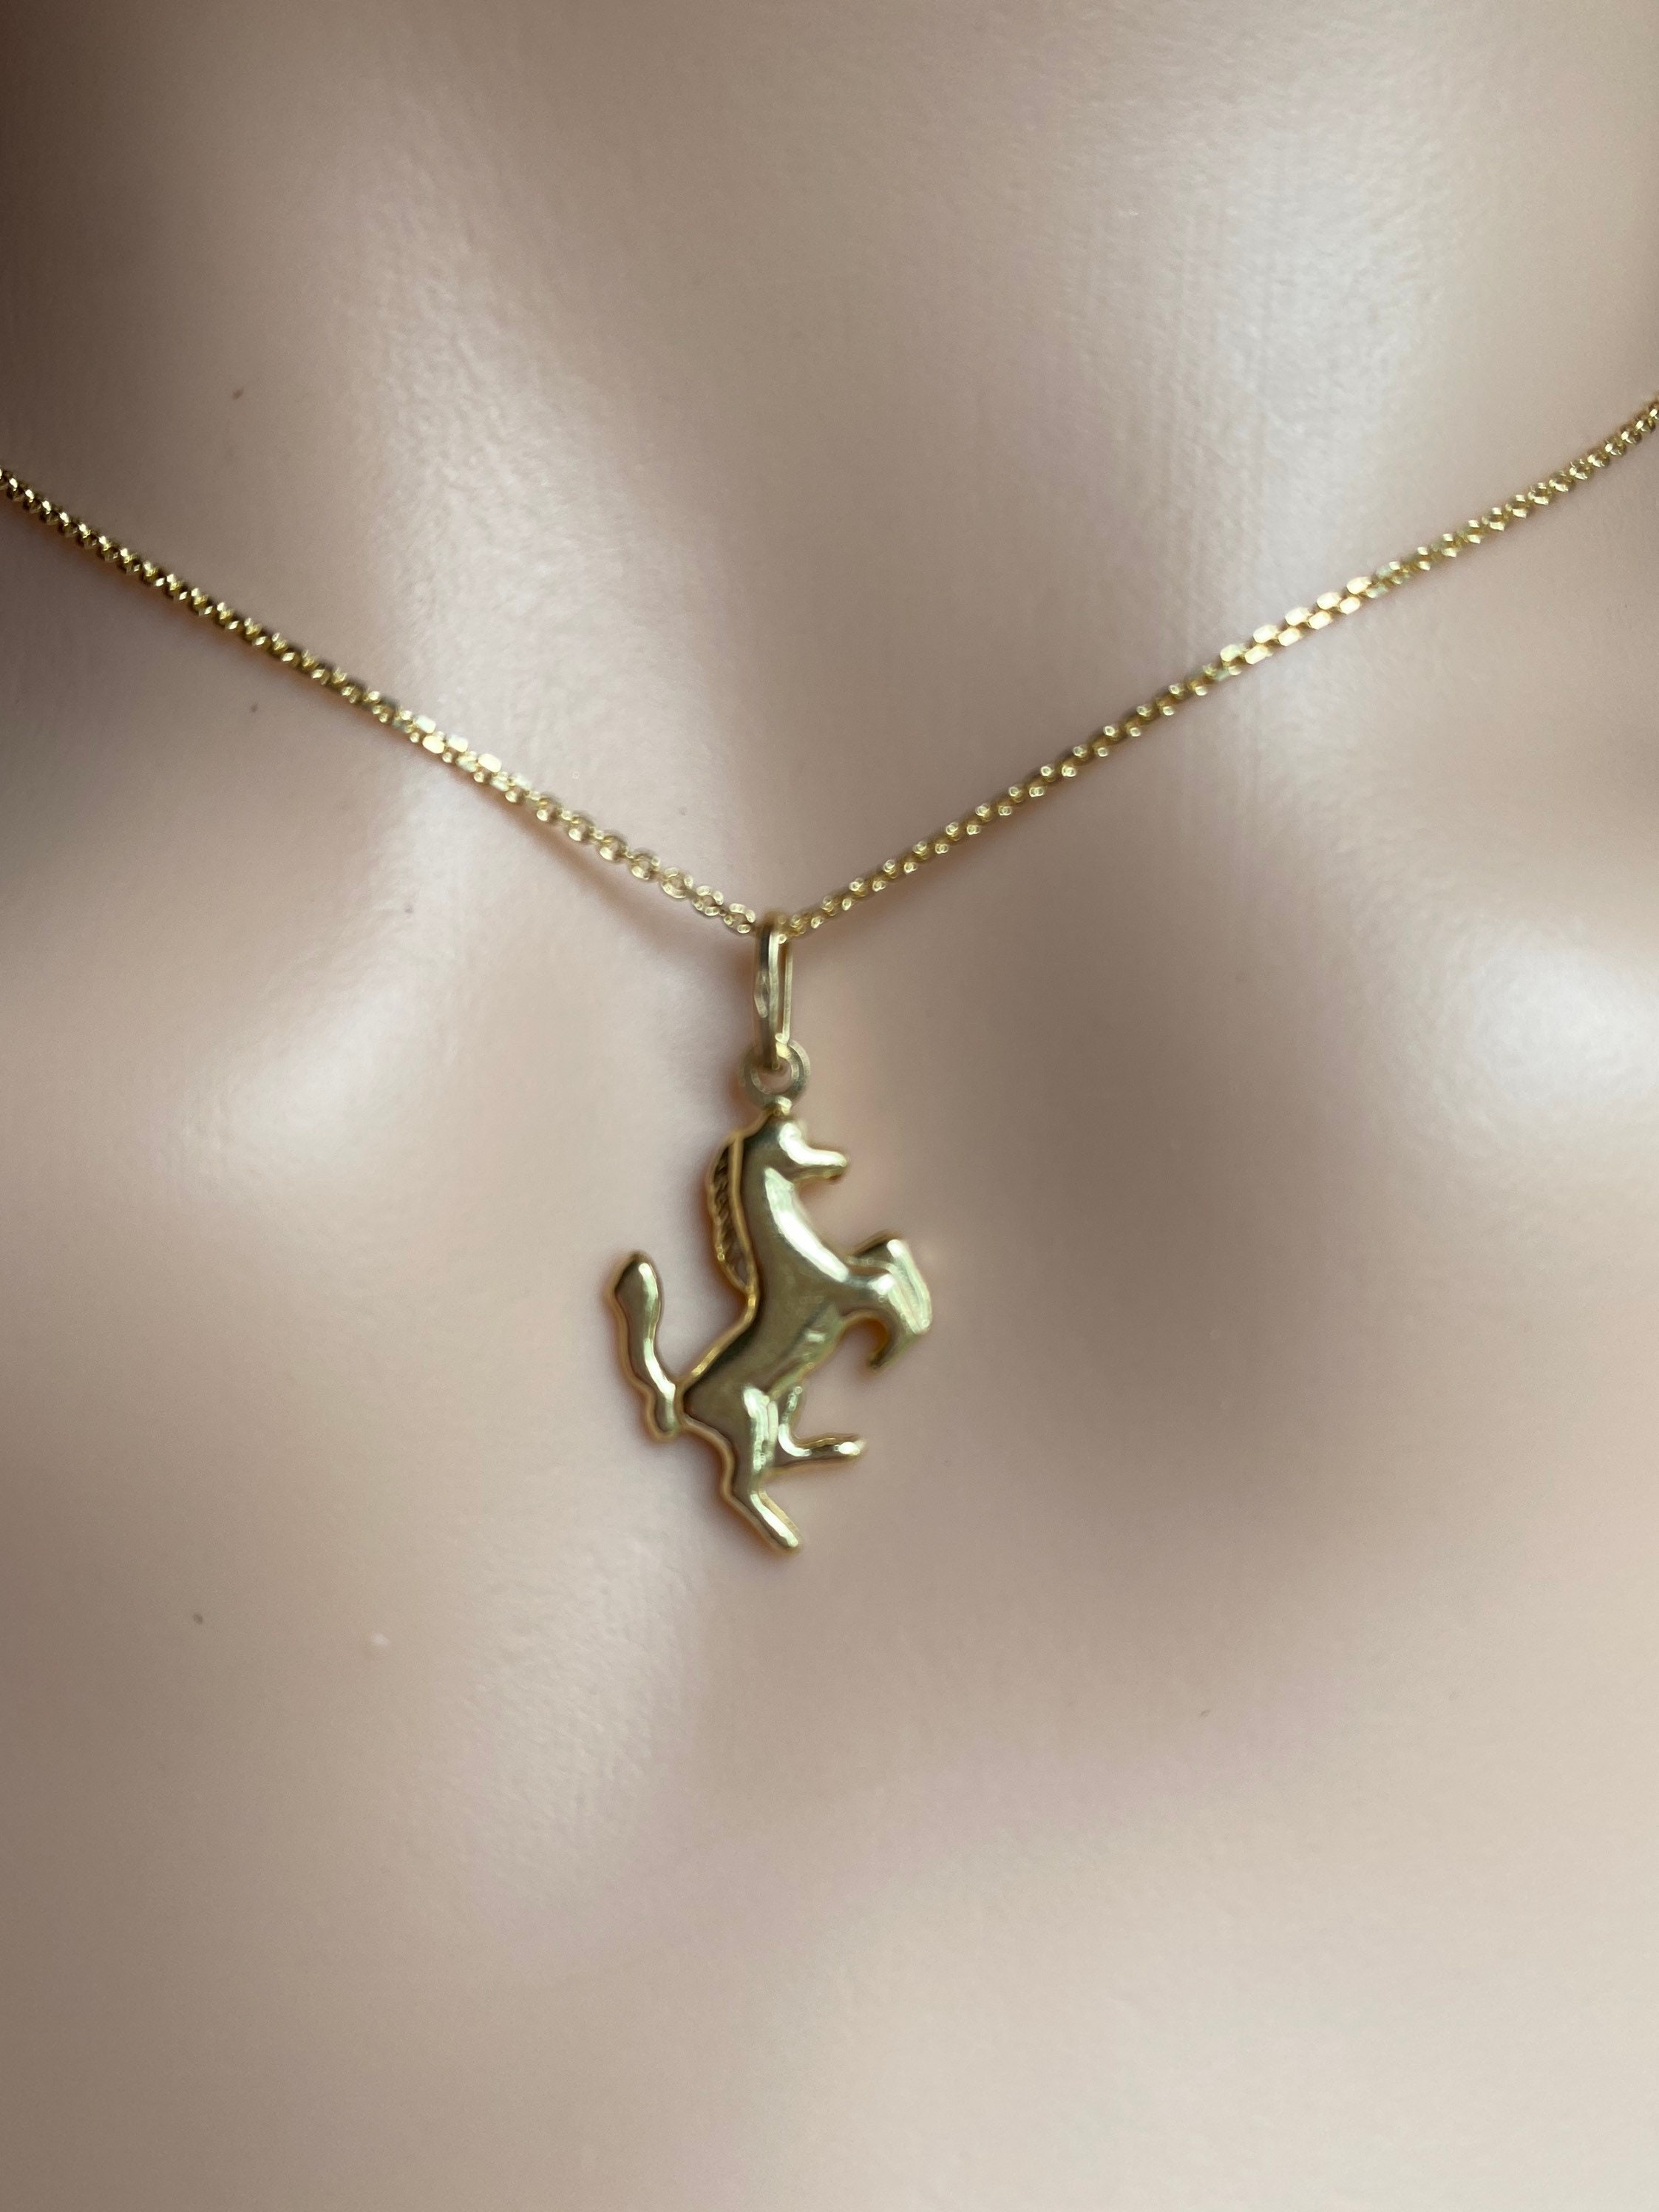 Buy Horse Necklace, Gold Horse Necklace Online in India - Etsy